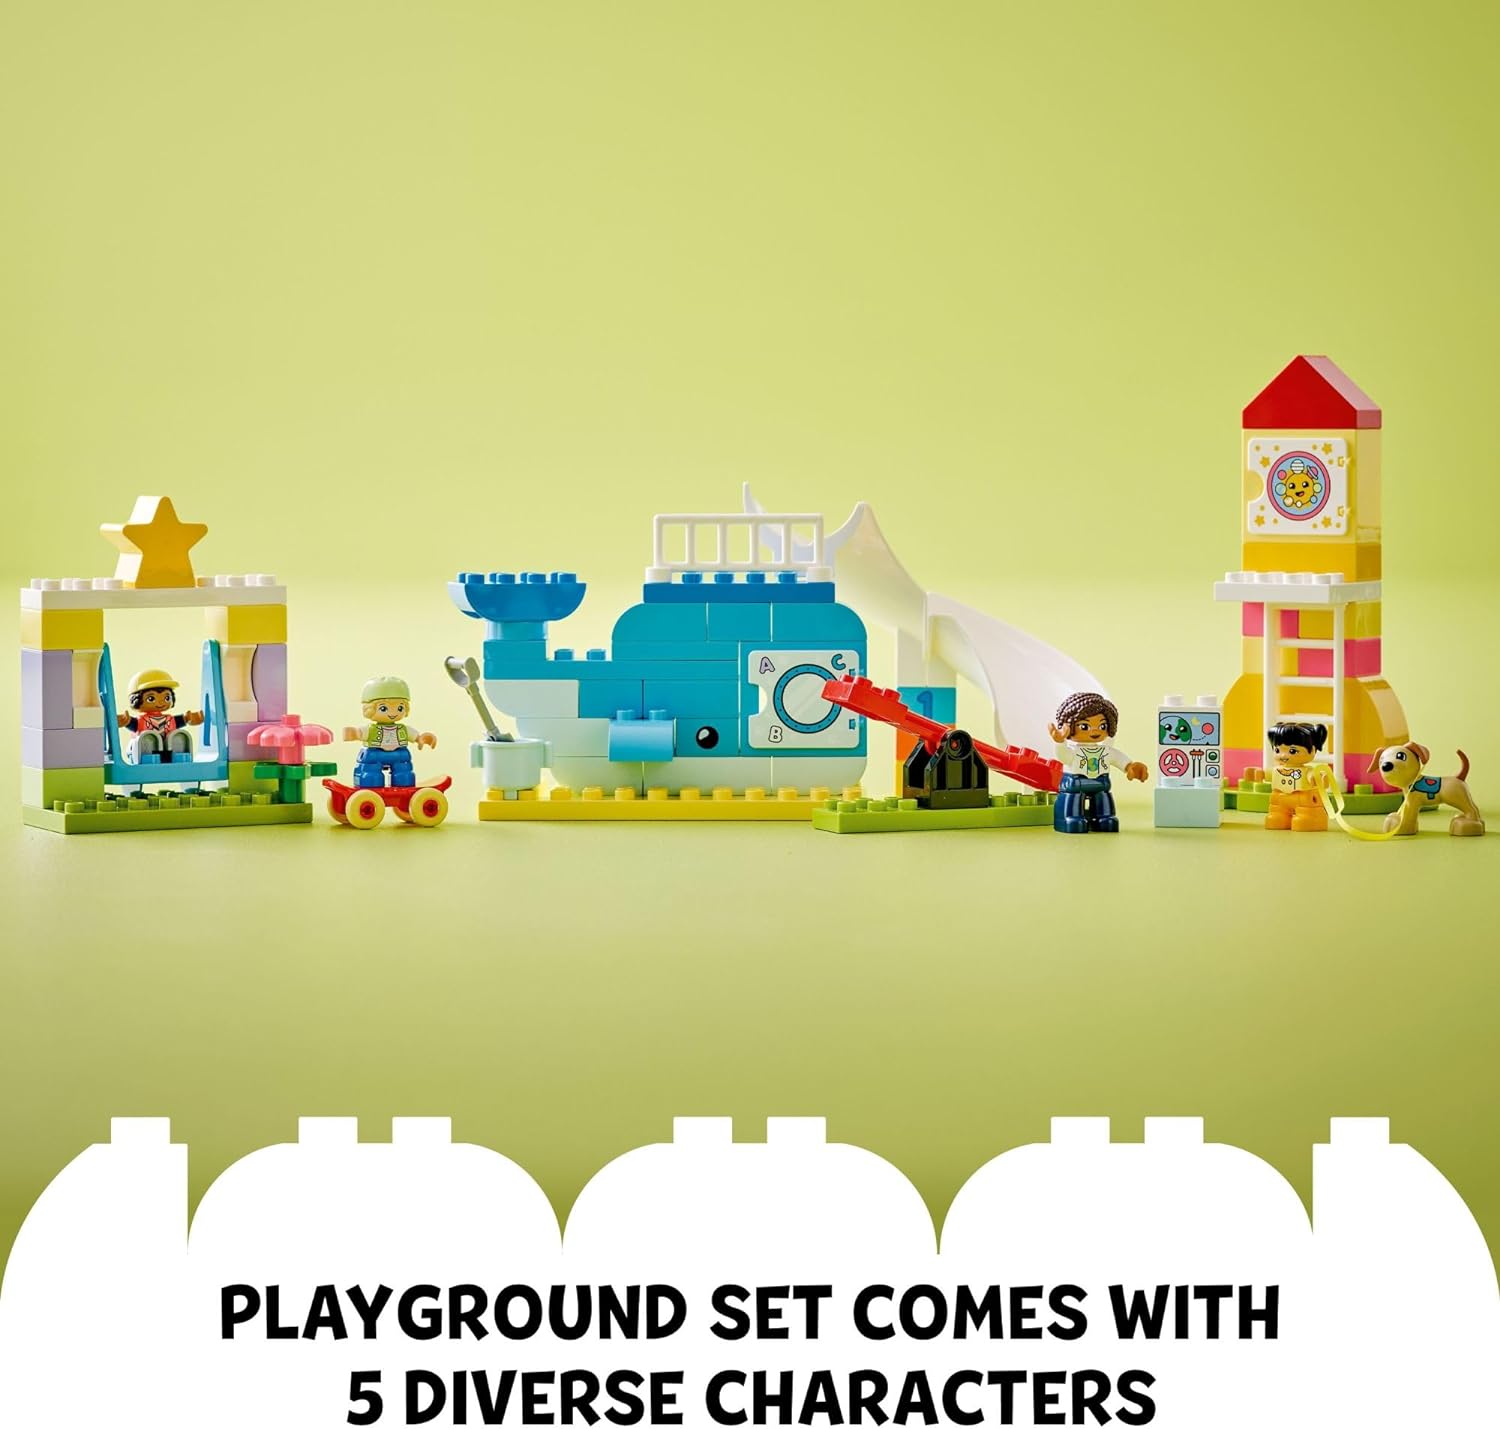 LEGO DUPLO Town Dream Playground 10991 Building Toy Set for Toddlers